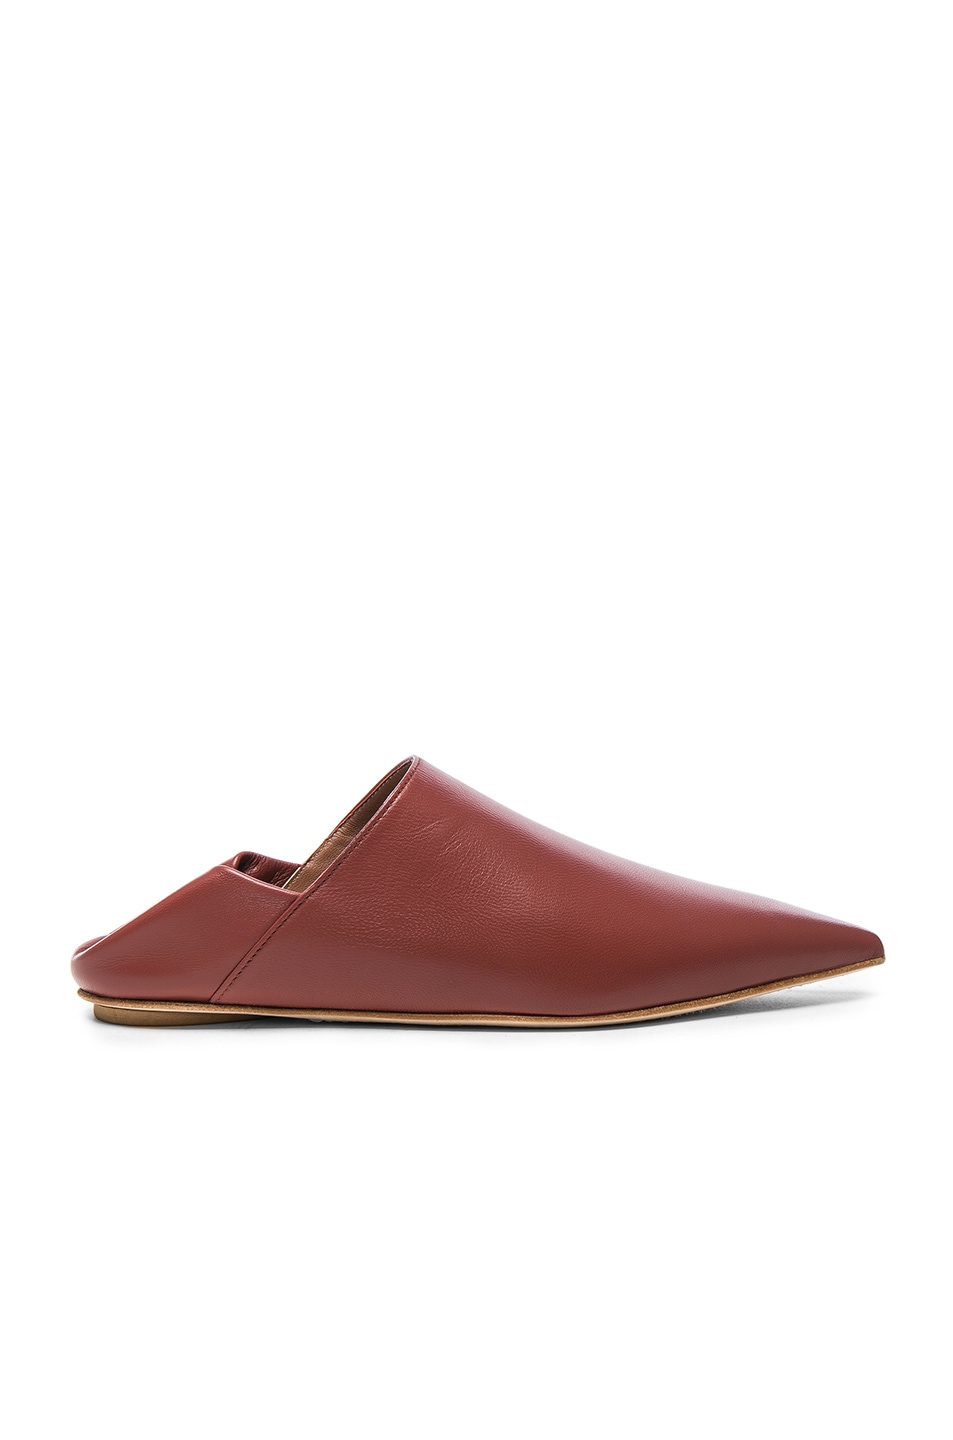 Image 1 of Marni Leather Sabot Mules in Saddle Brown